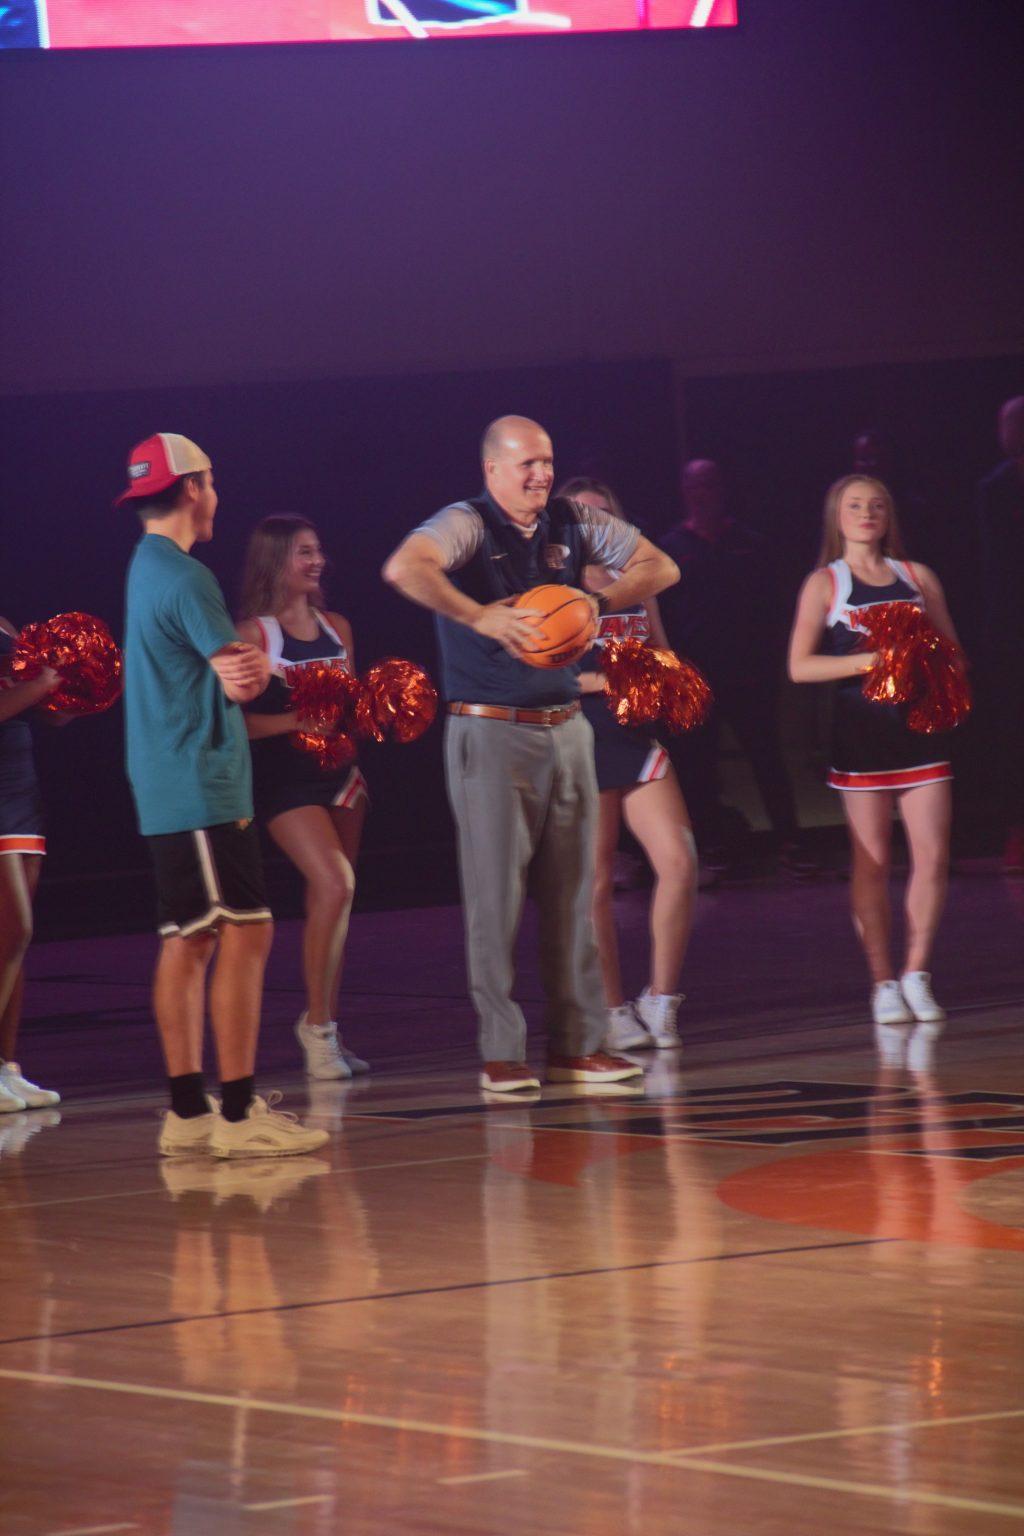 President Jim Gash getting ready to attempt a half-court shot that would eventually win sophomore Johann Luna a semester's worth of free tuition. The half-court shot for tuition is a tradition that takes place at Blue and Orange Madness each year. Photo by Lindy Smith